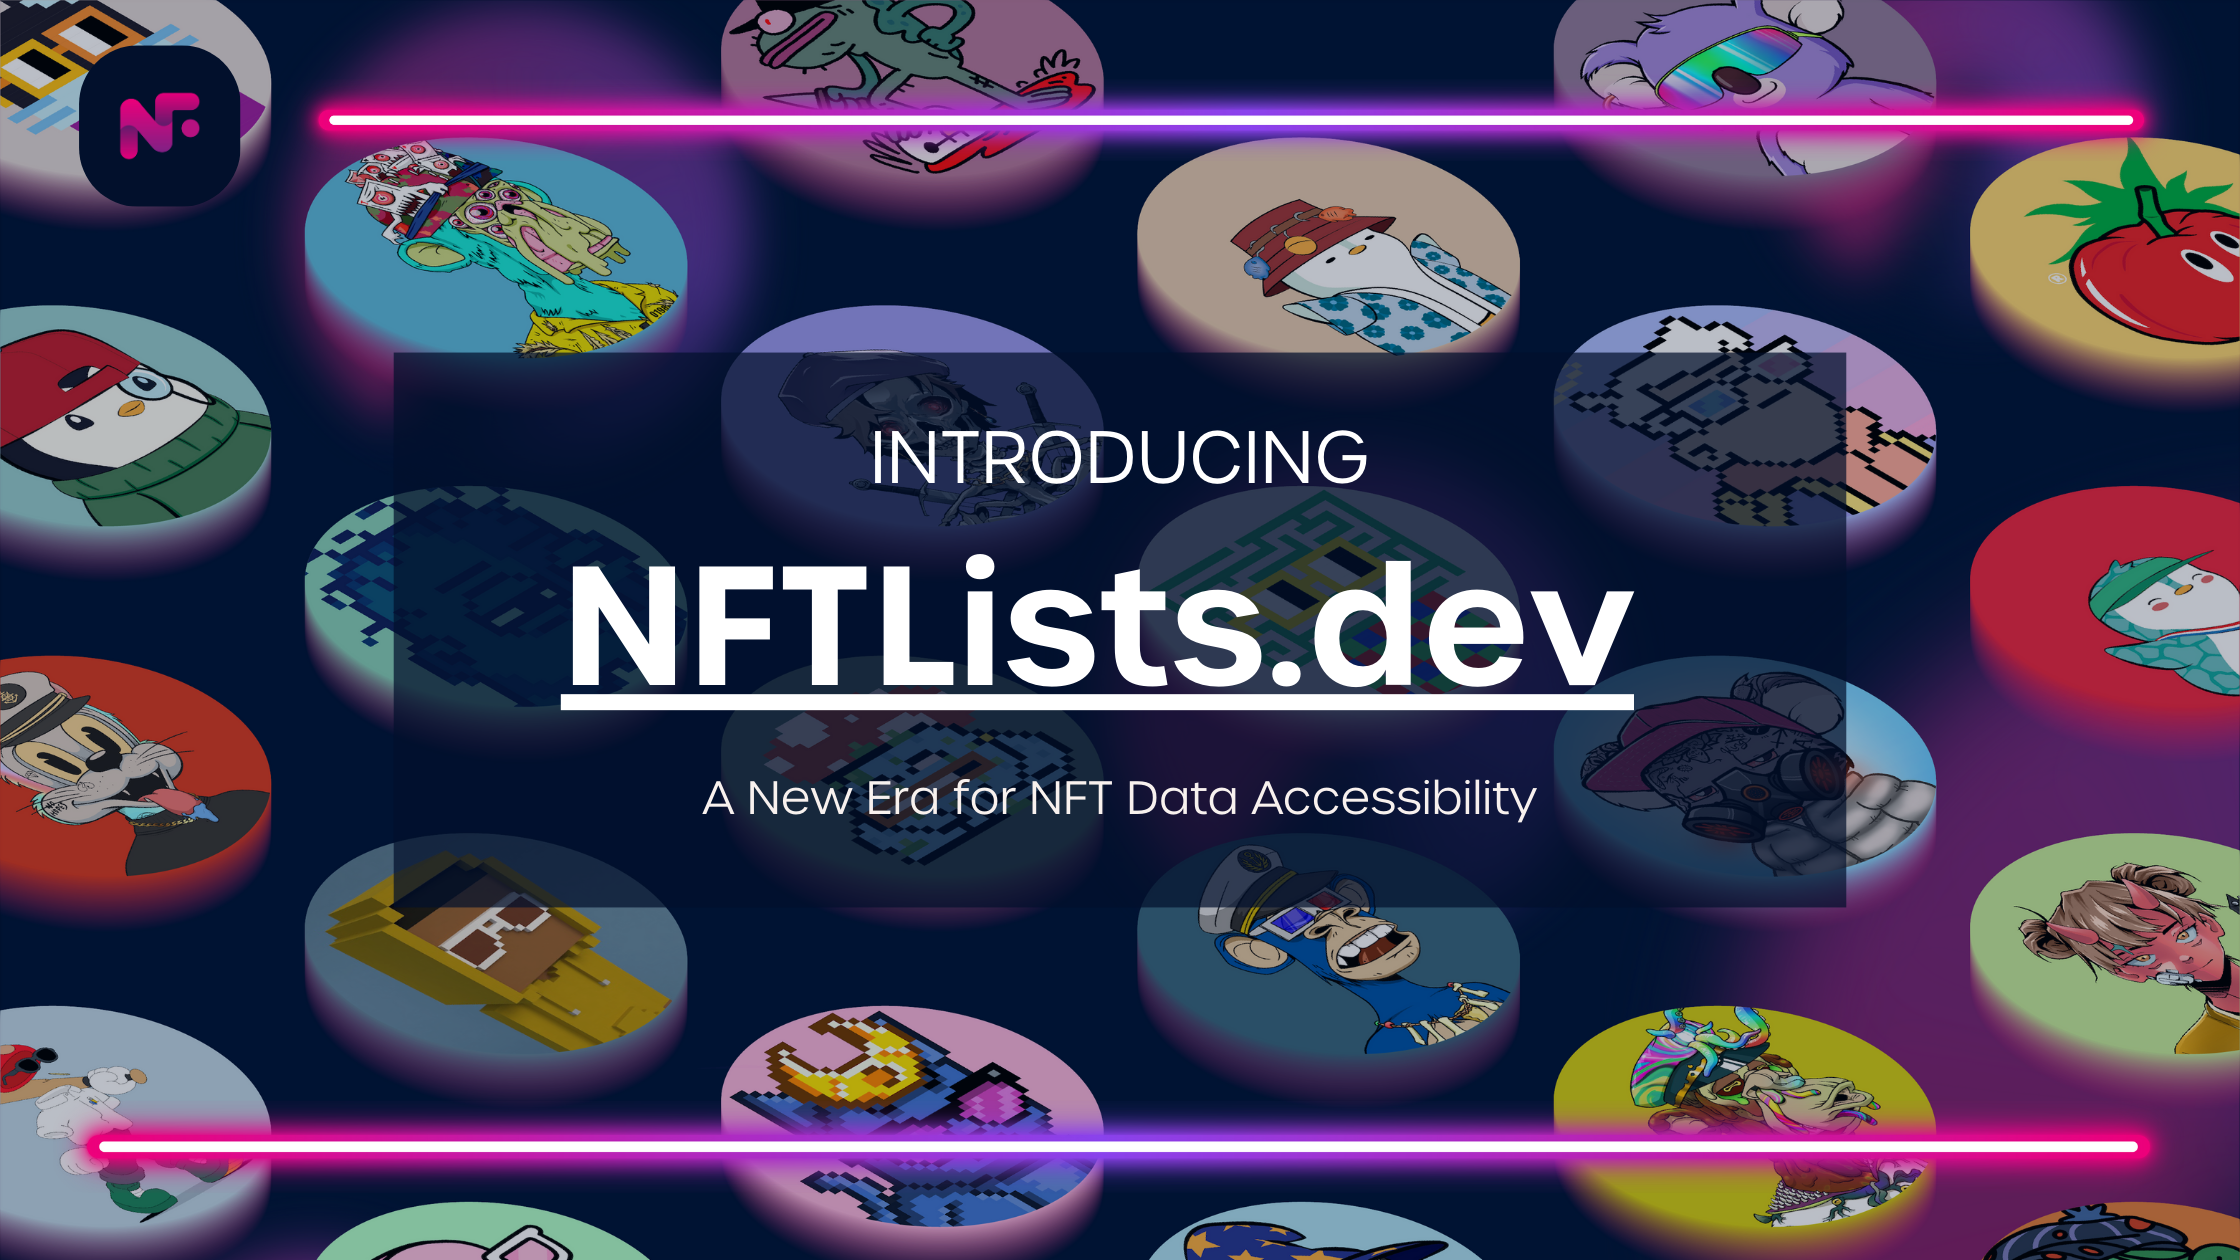 Introducing NFTLists.dev: A New Era for NFT Data Accessibility